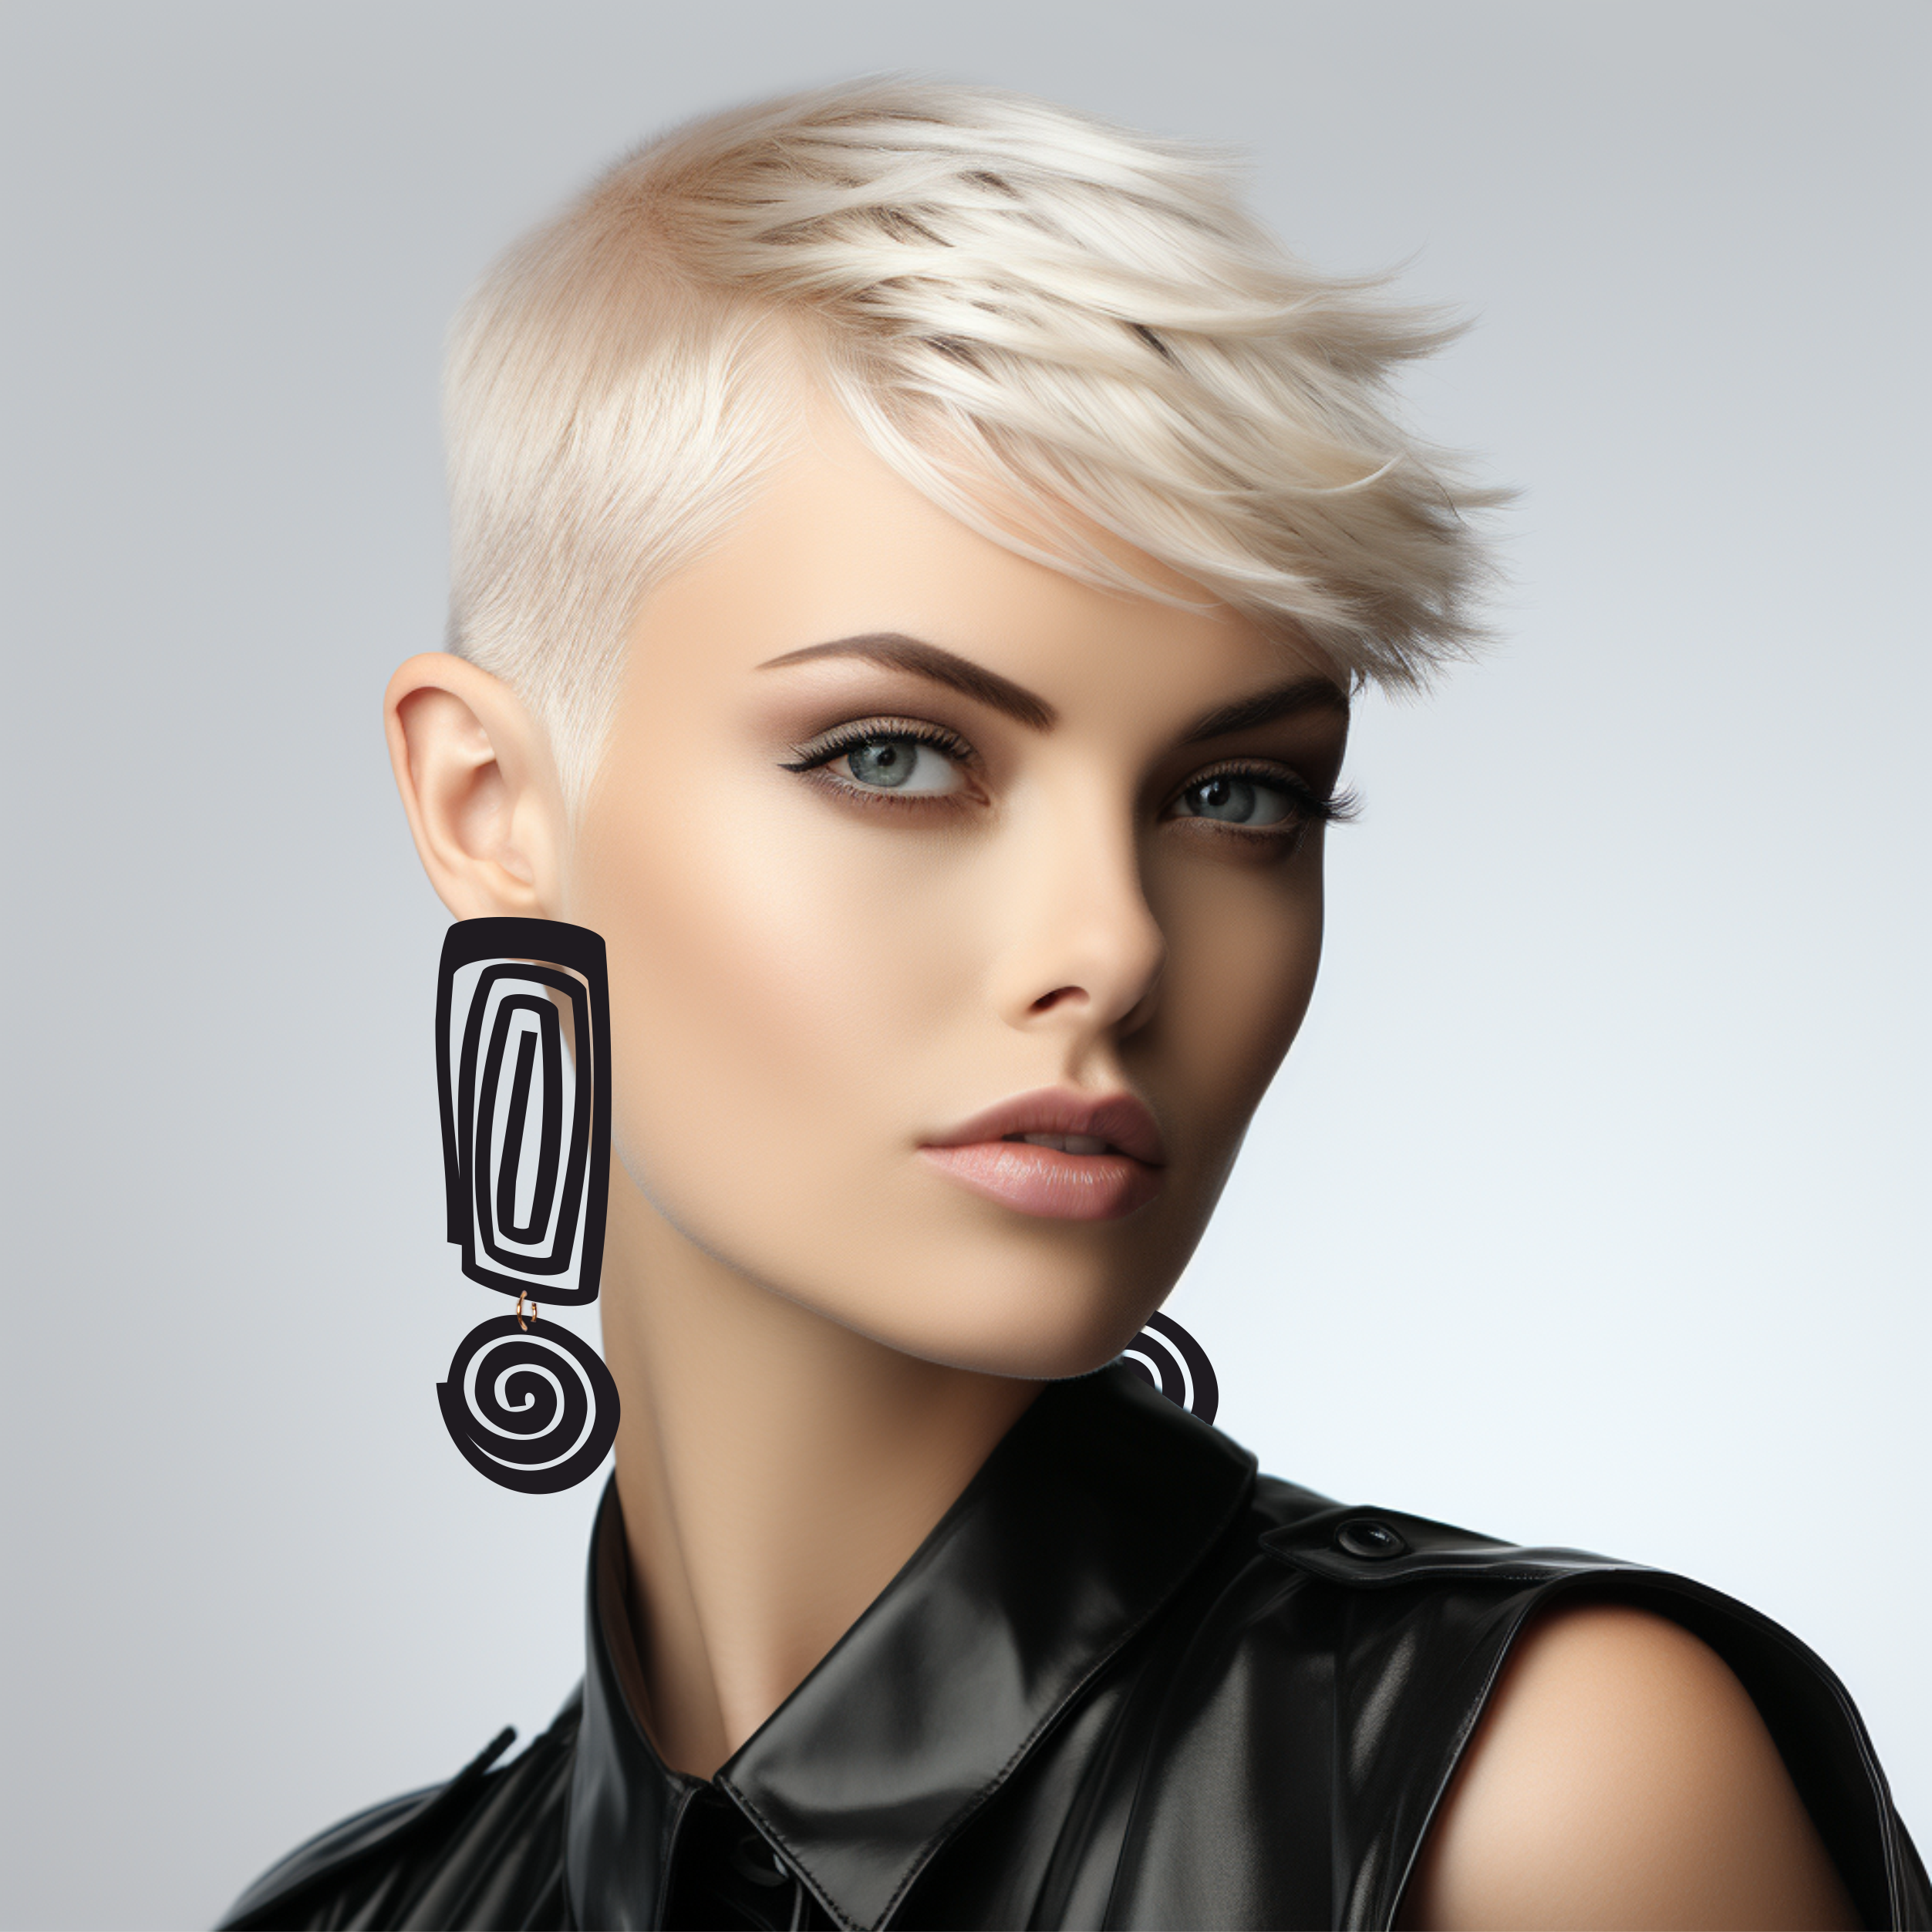 Top more than 185 fashion earrings for short hair best